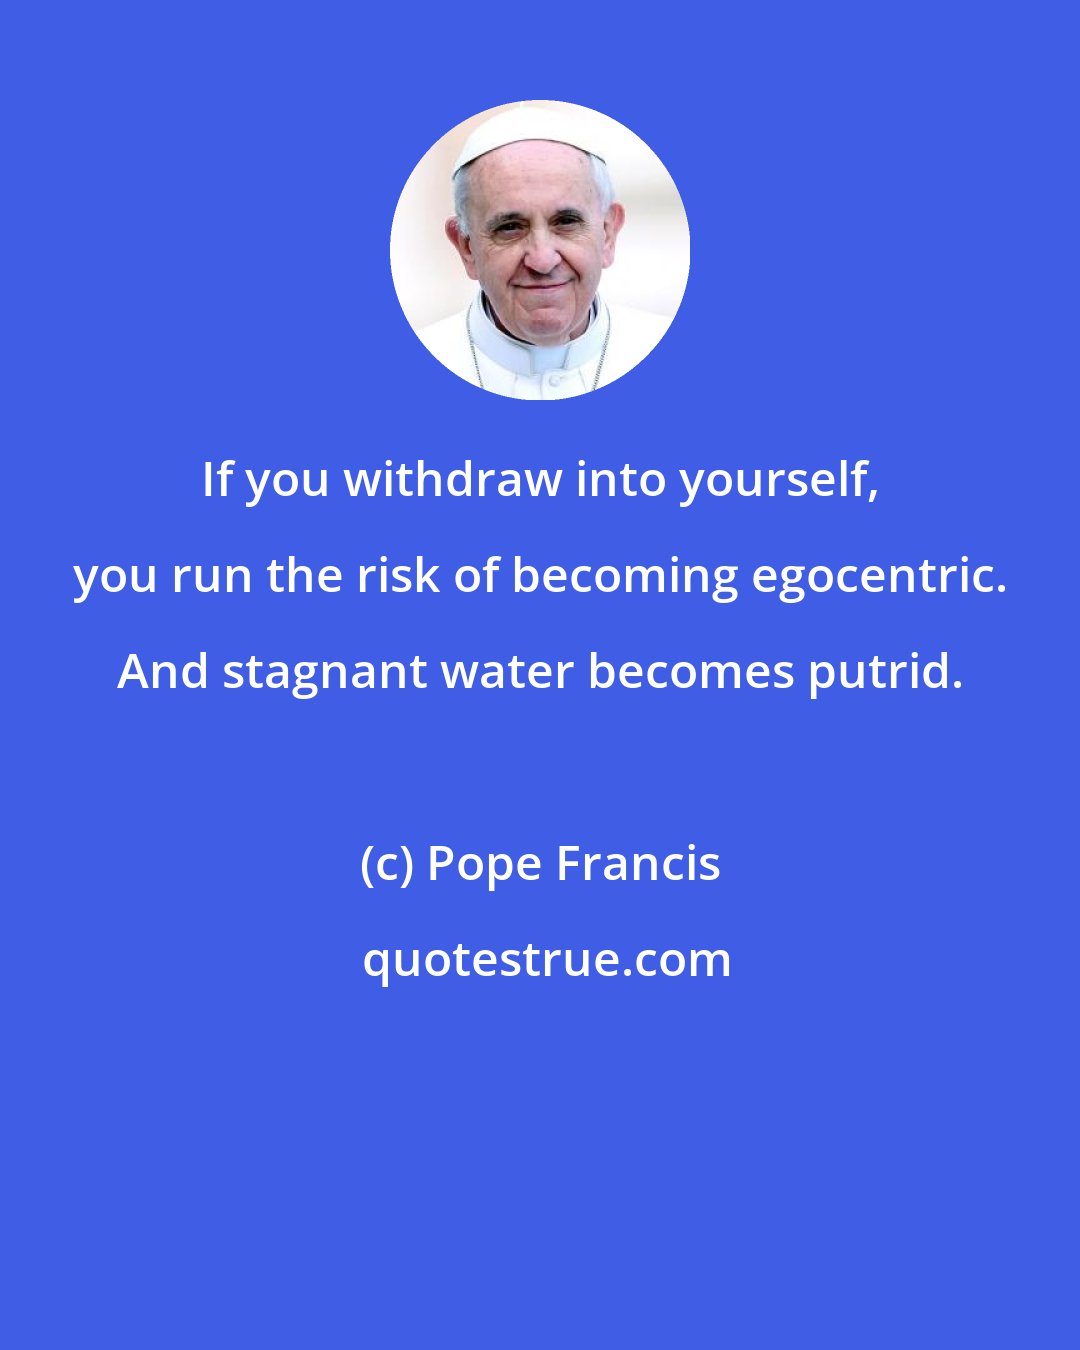 Pope Francis: If you withdraw into yourself, you run the risk of becoming egocentric. And stagnant water becomes putrid.